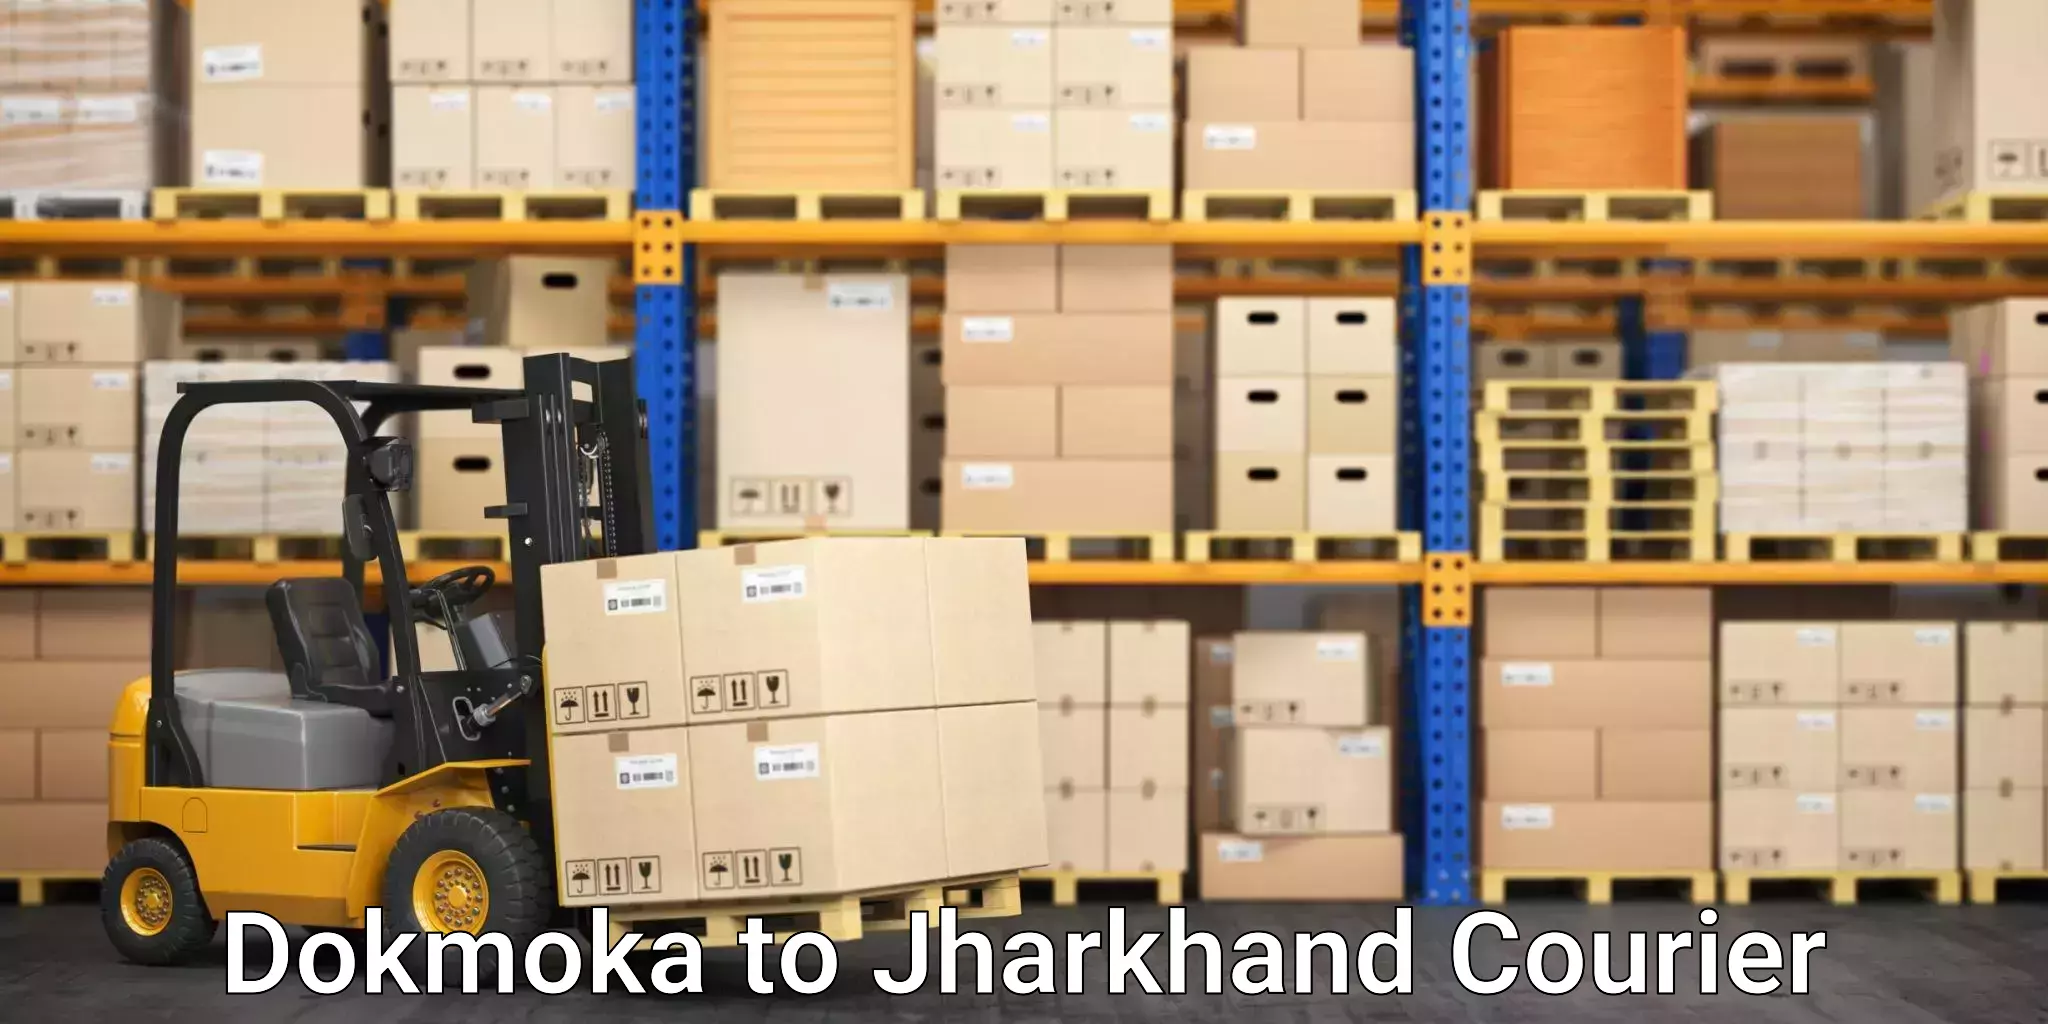 Automated parcel services Dokmoka to Jamshedpur